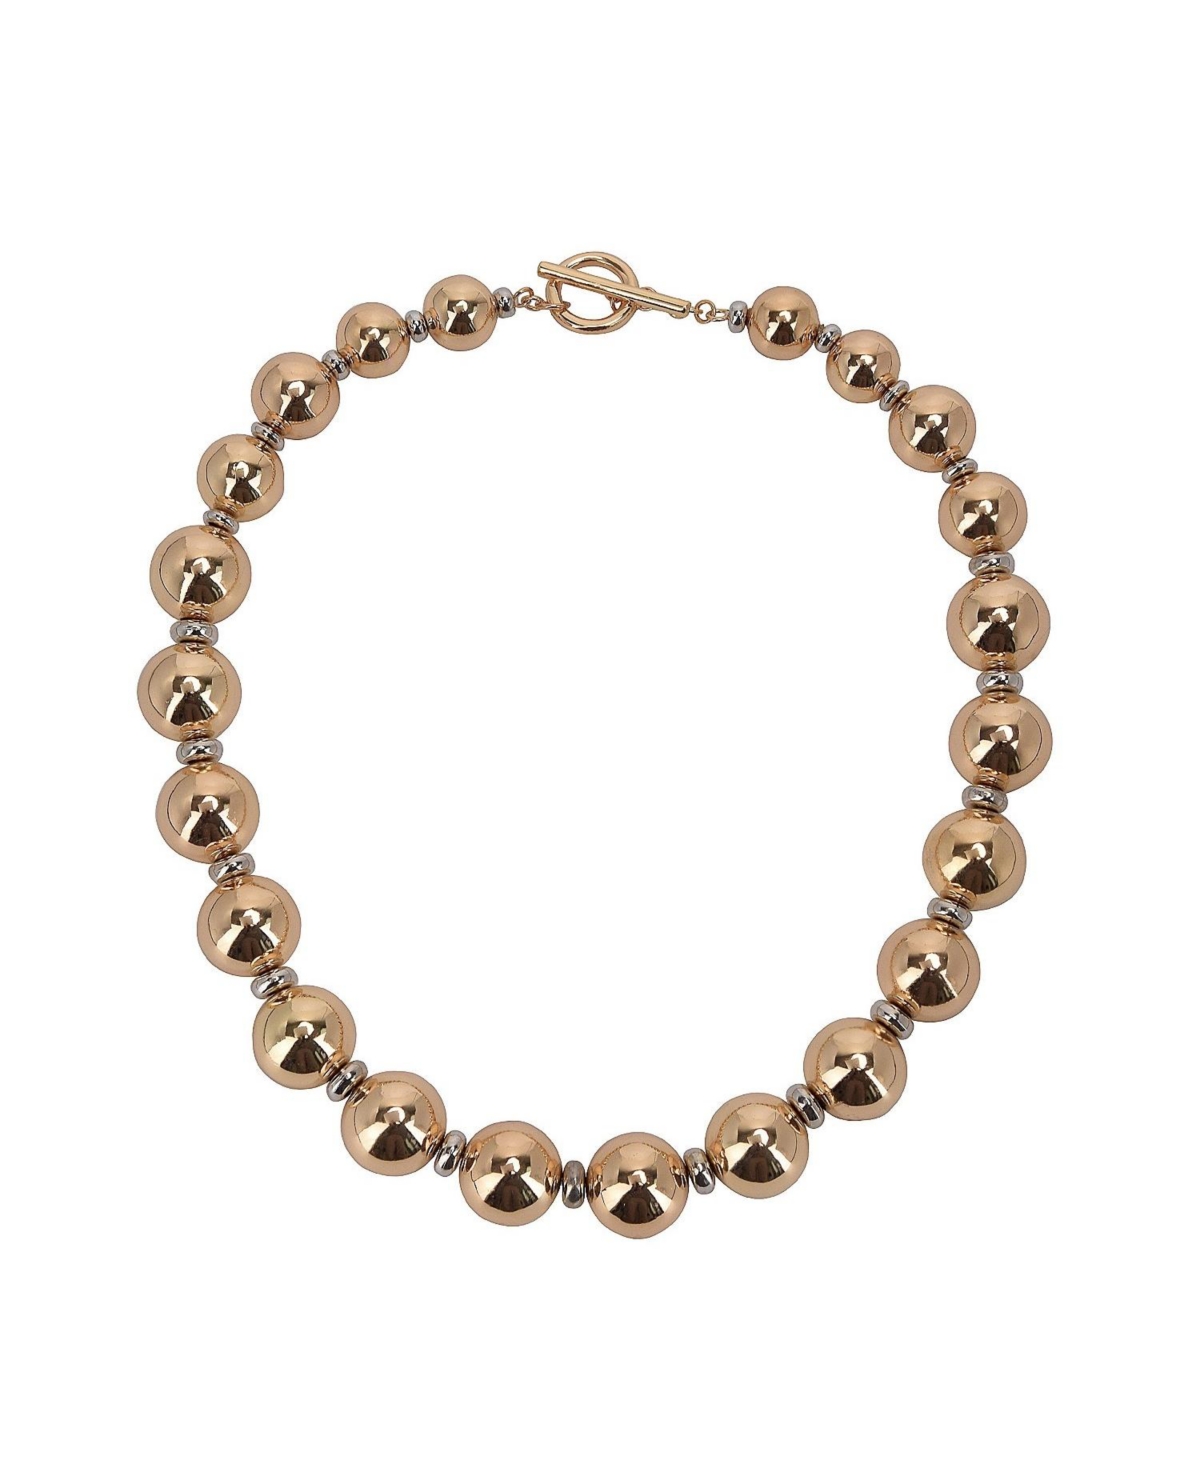 Round Bead Necklace - Two tone